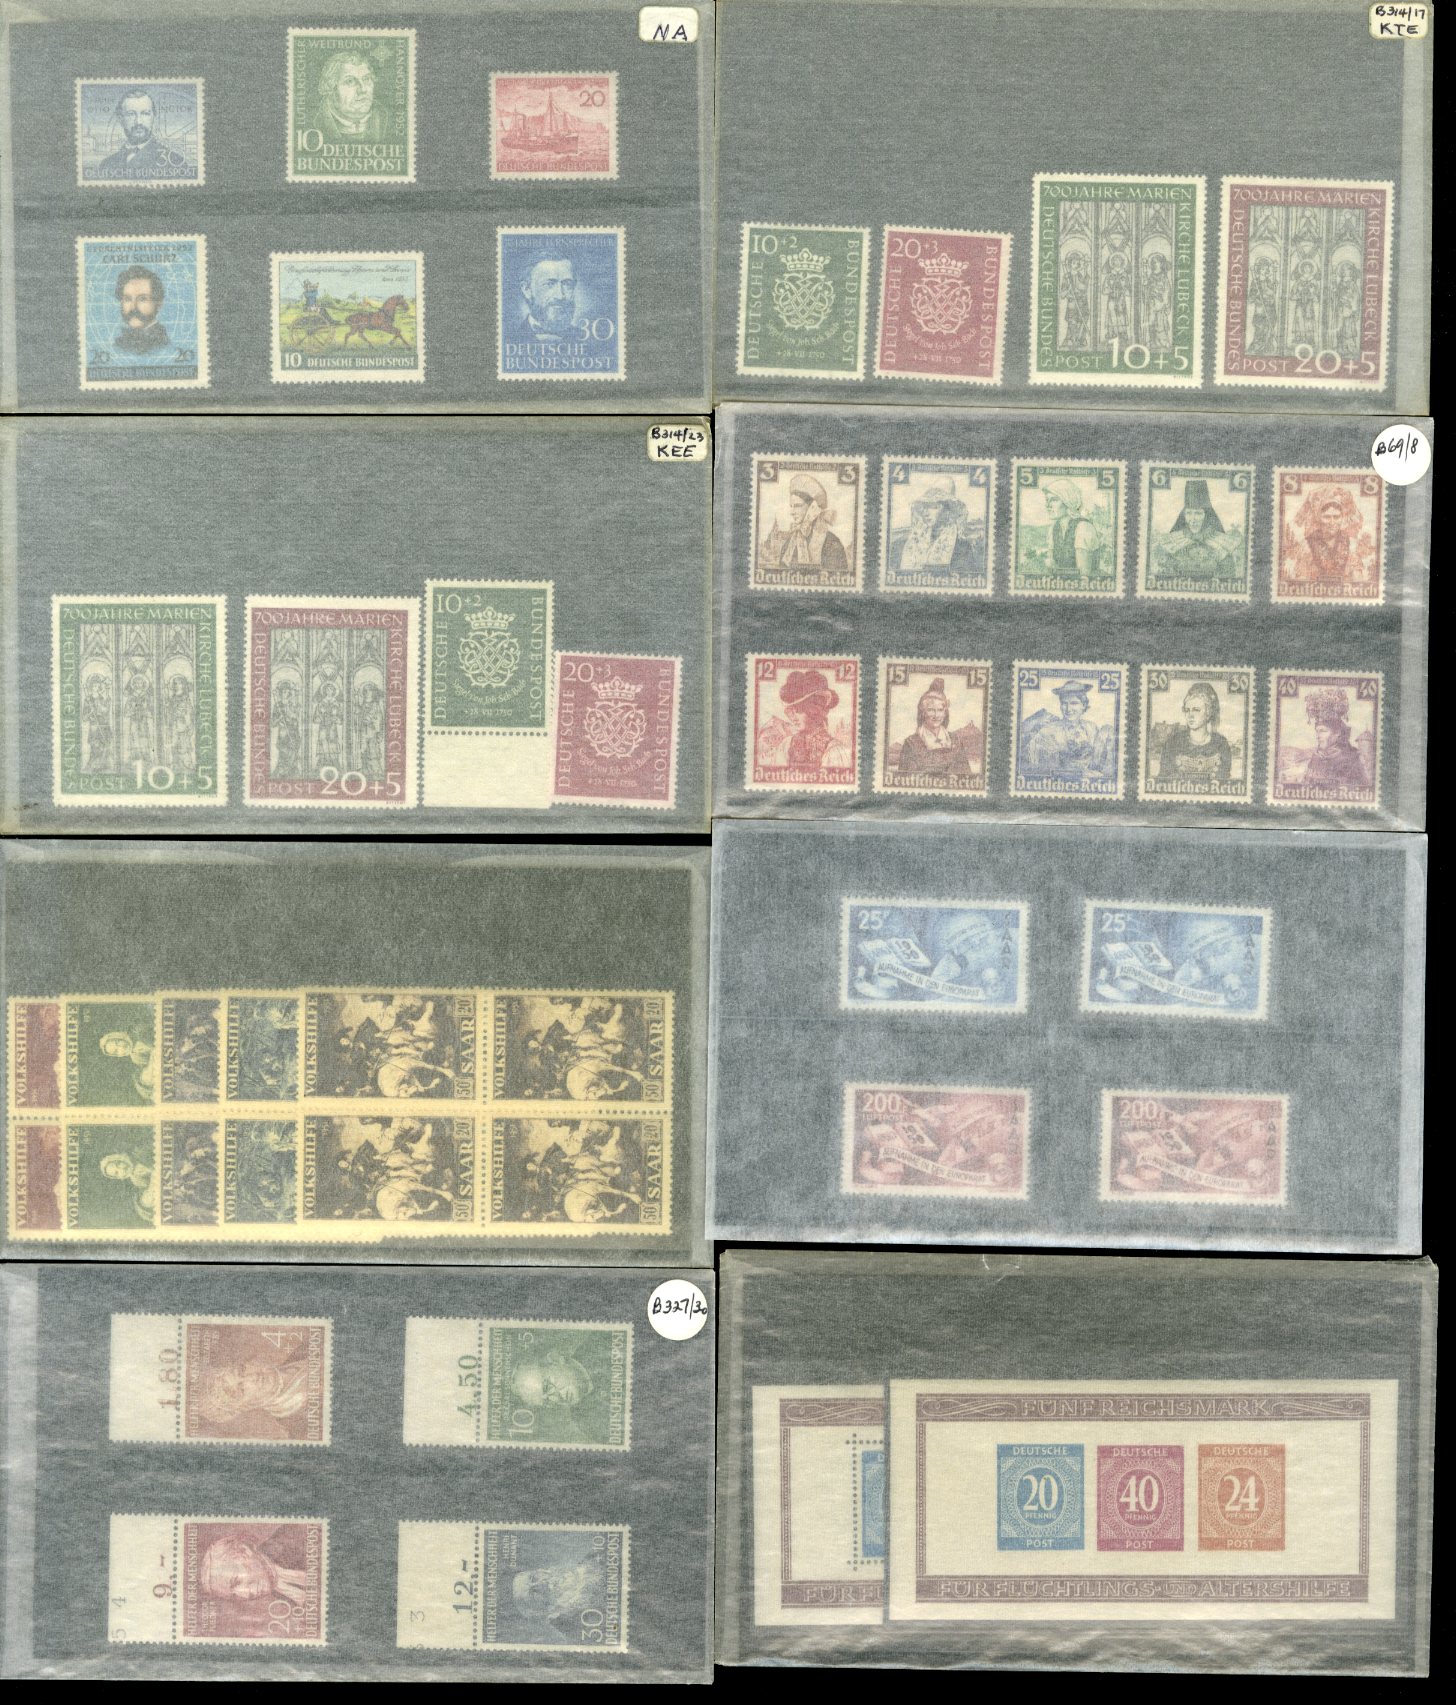 Lot 1448 - LARGE LOTS AND COLLECTIONS LEBANON  -  Cherrystone Auctions U.S. & Worldwide Stamps & Postal History